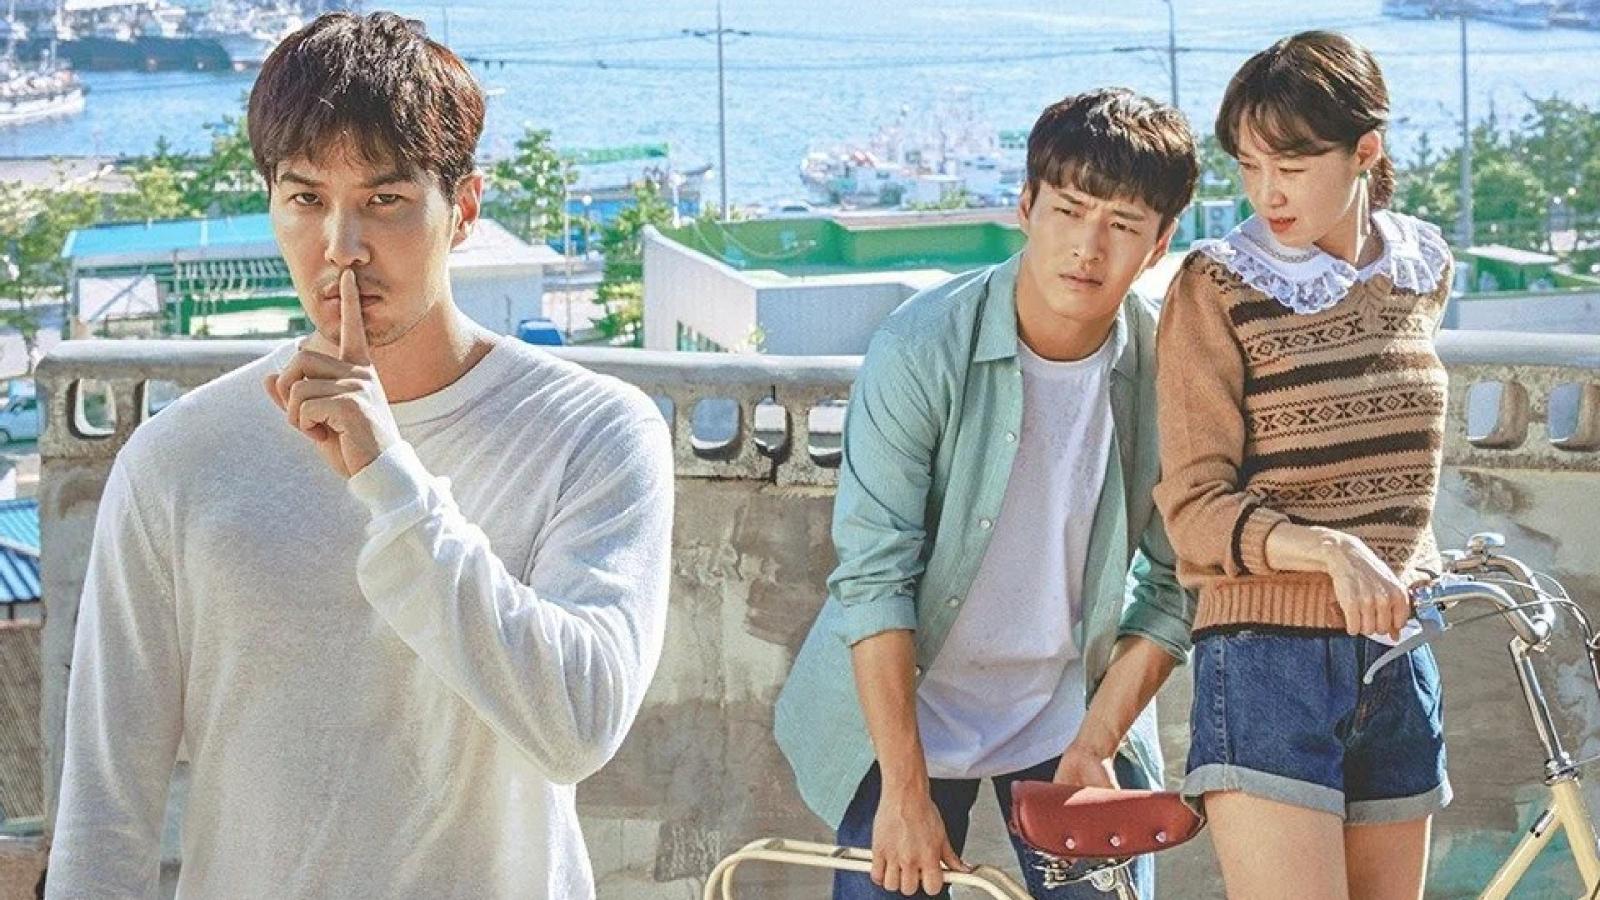 Simple Yet Wholesome: 10 More K-Dramas Like Reply 1988 - image 4